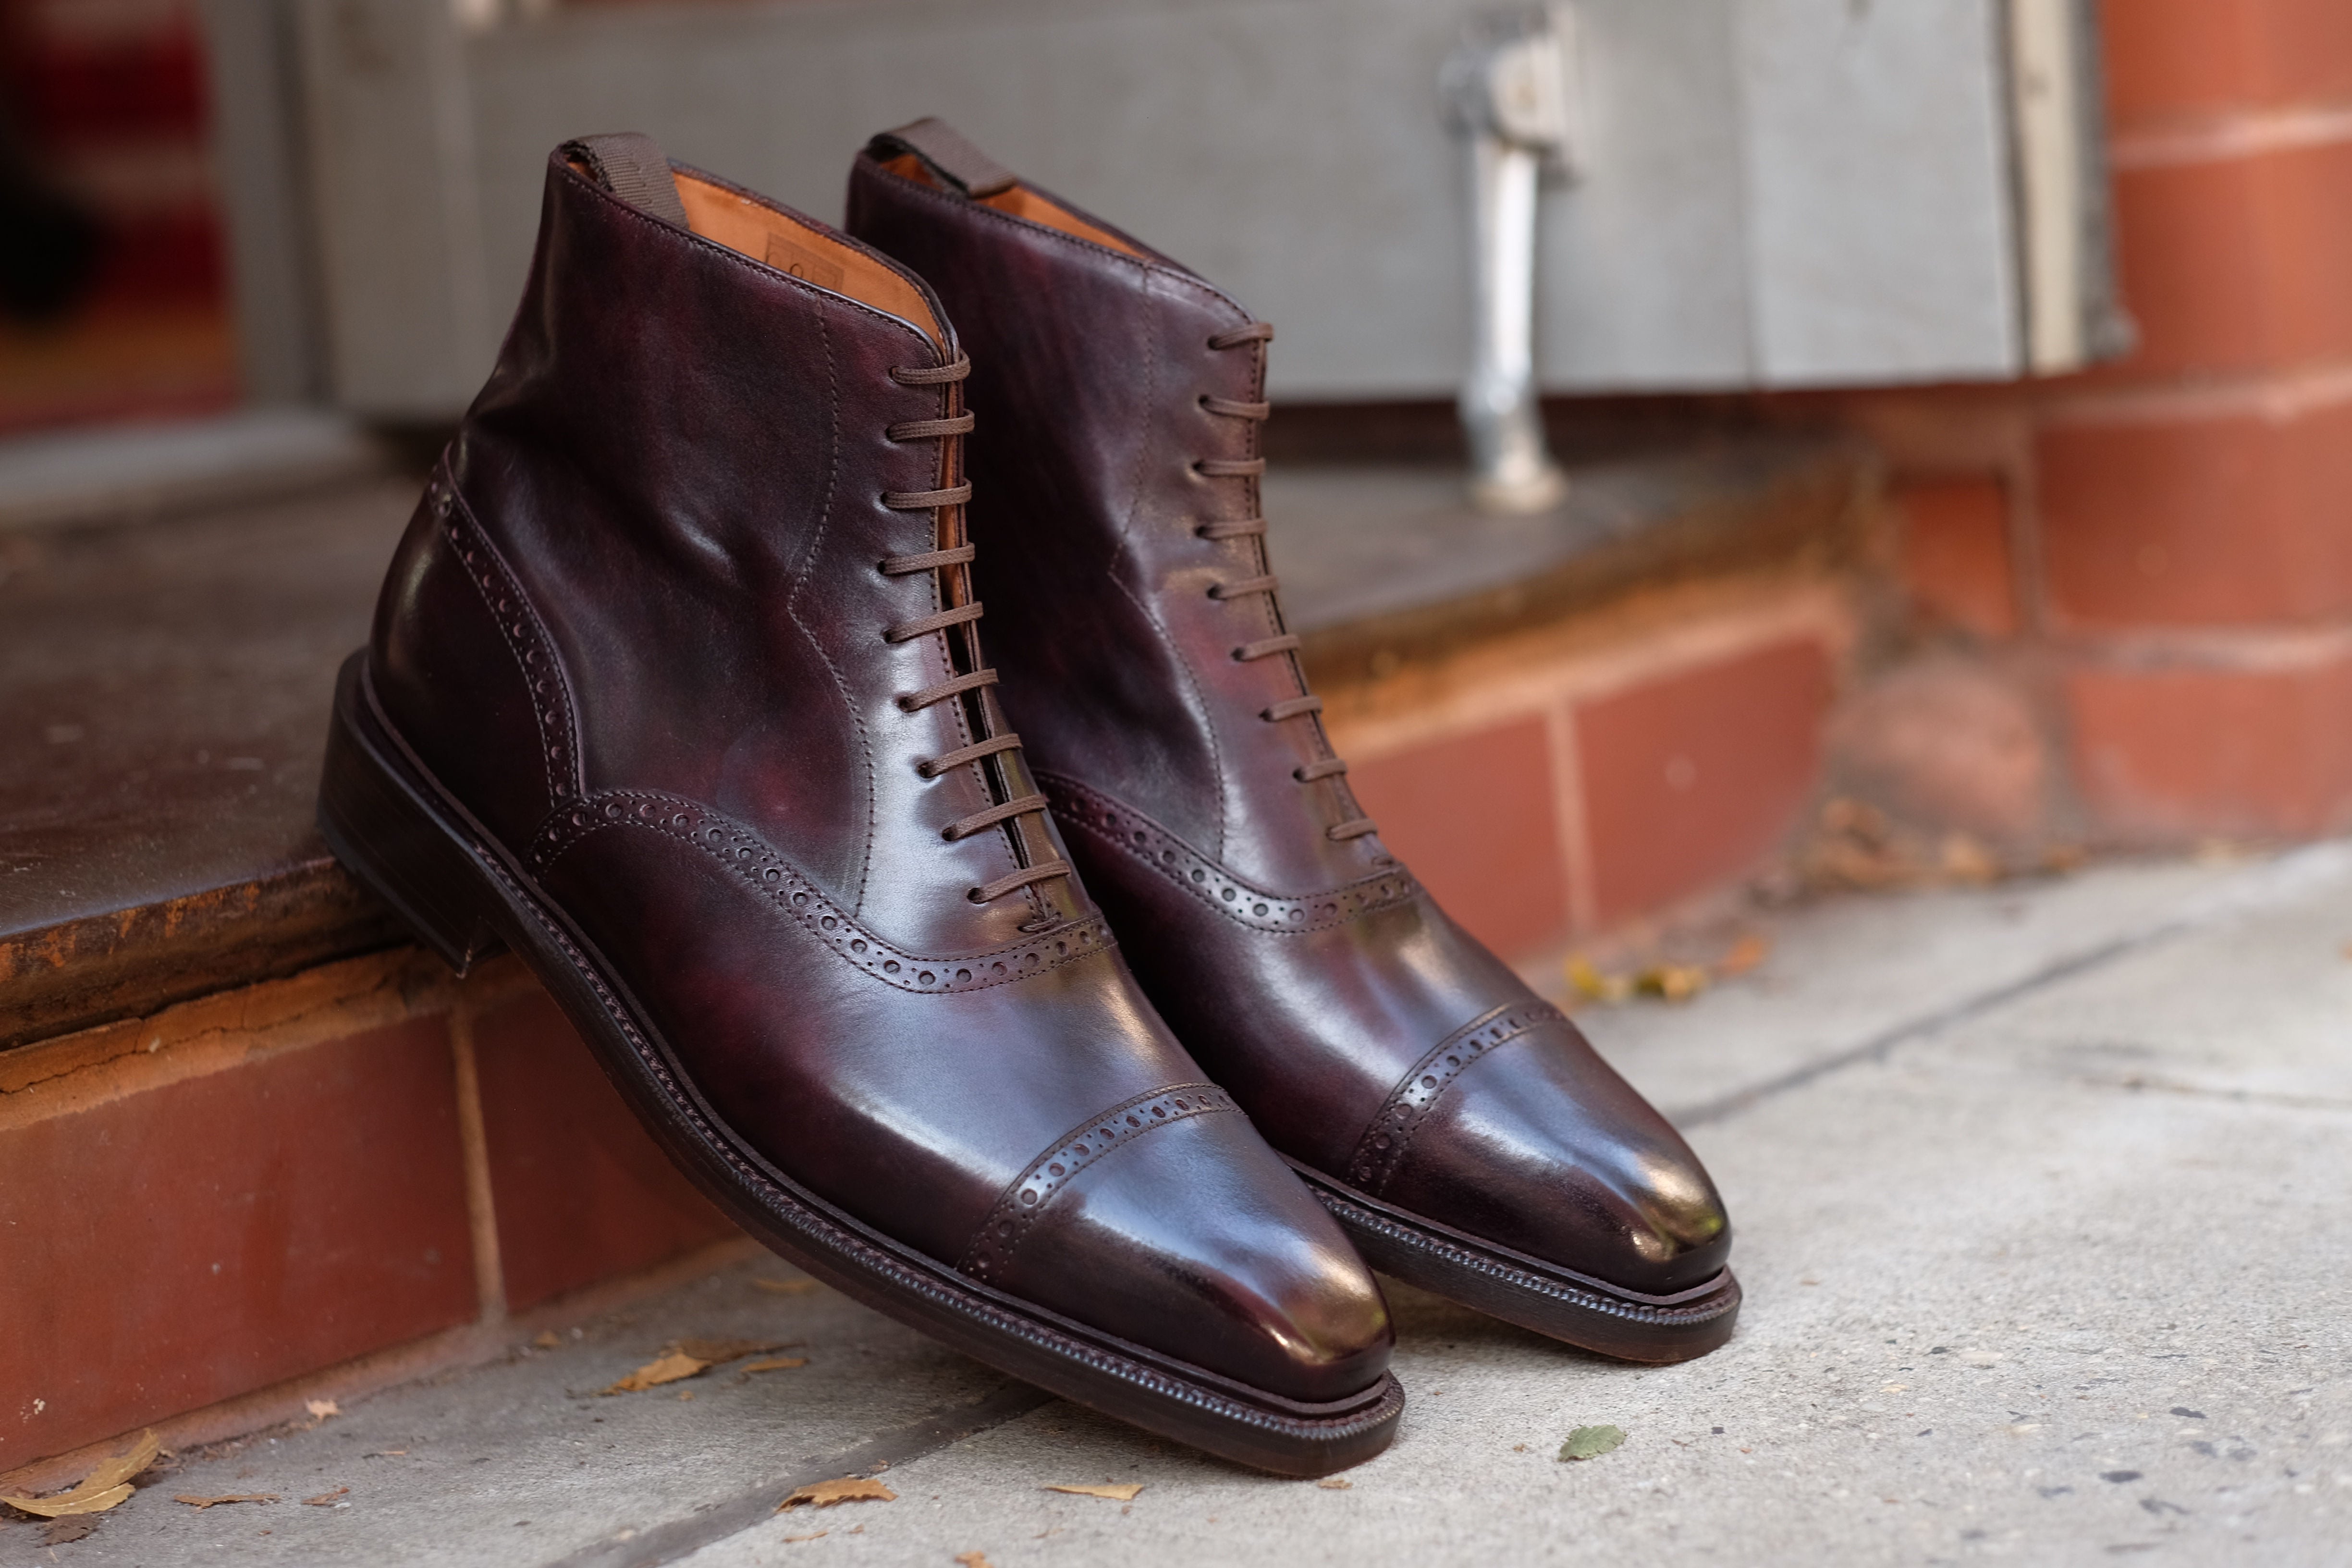 Seaview - MTO - Plum Museum Calf - MGF Last - Double Leather Sole - Storm Welt